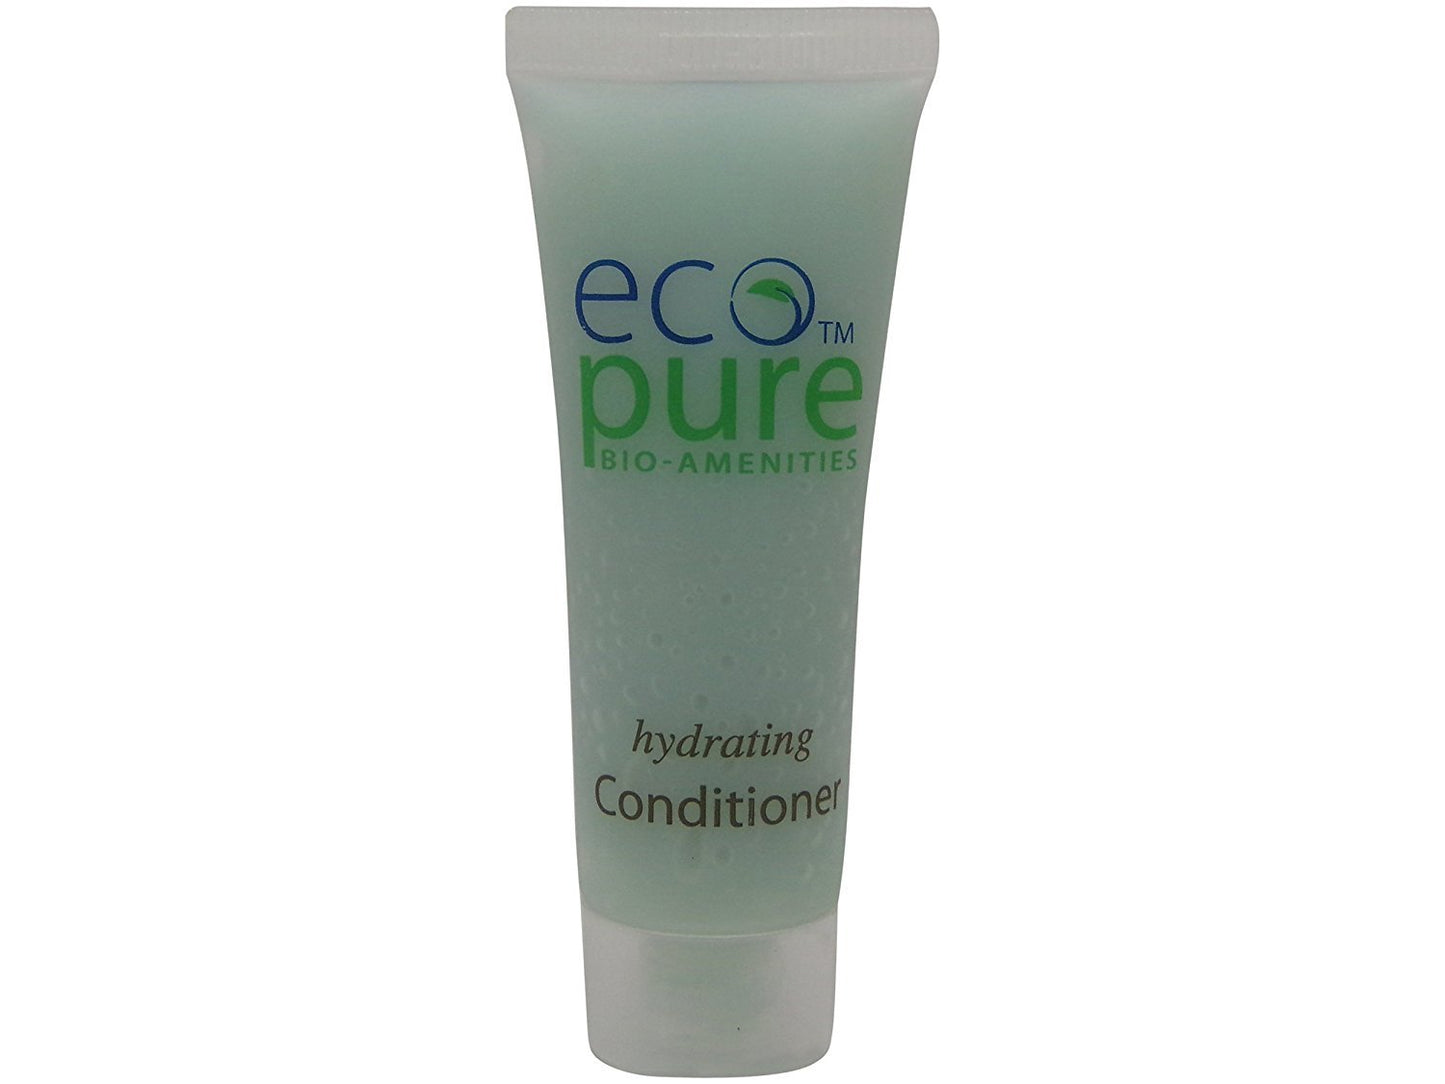 Eco Pure Hydrating Conditioner Lot of 18 each 1oz Bottles